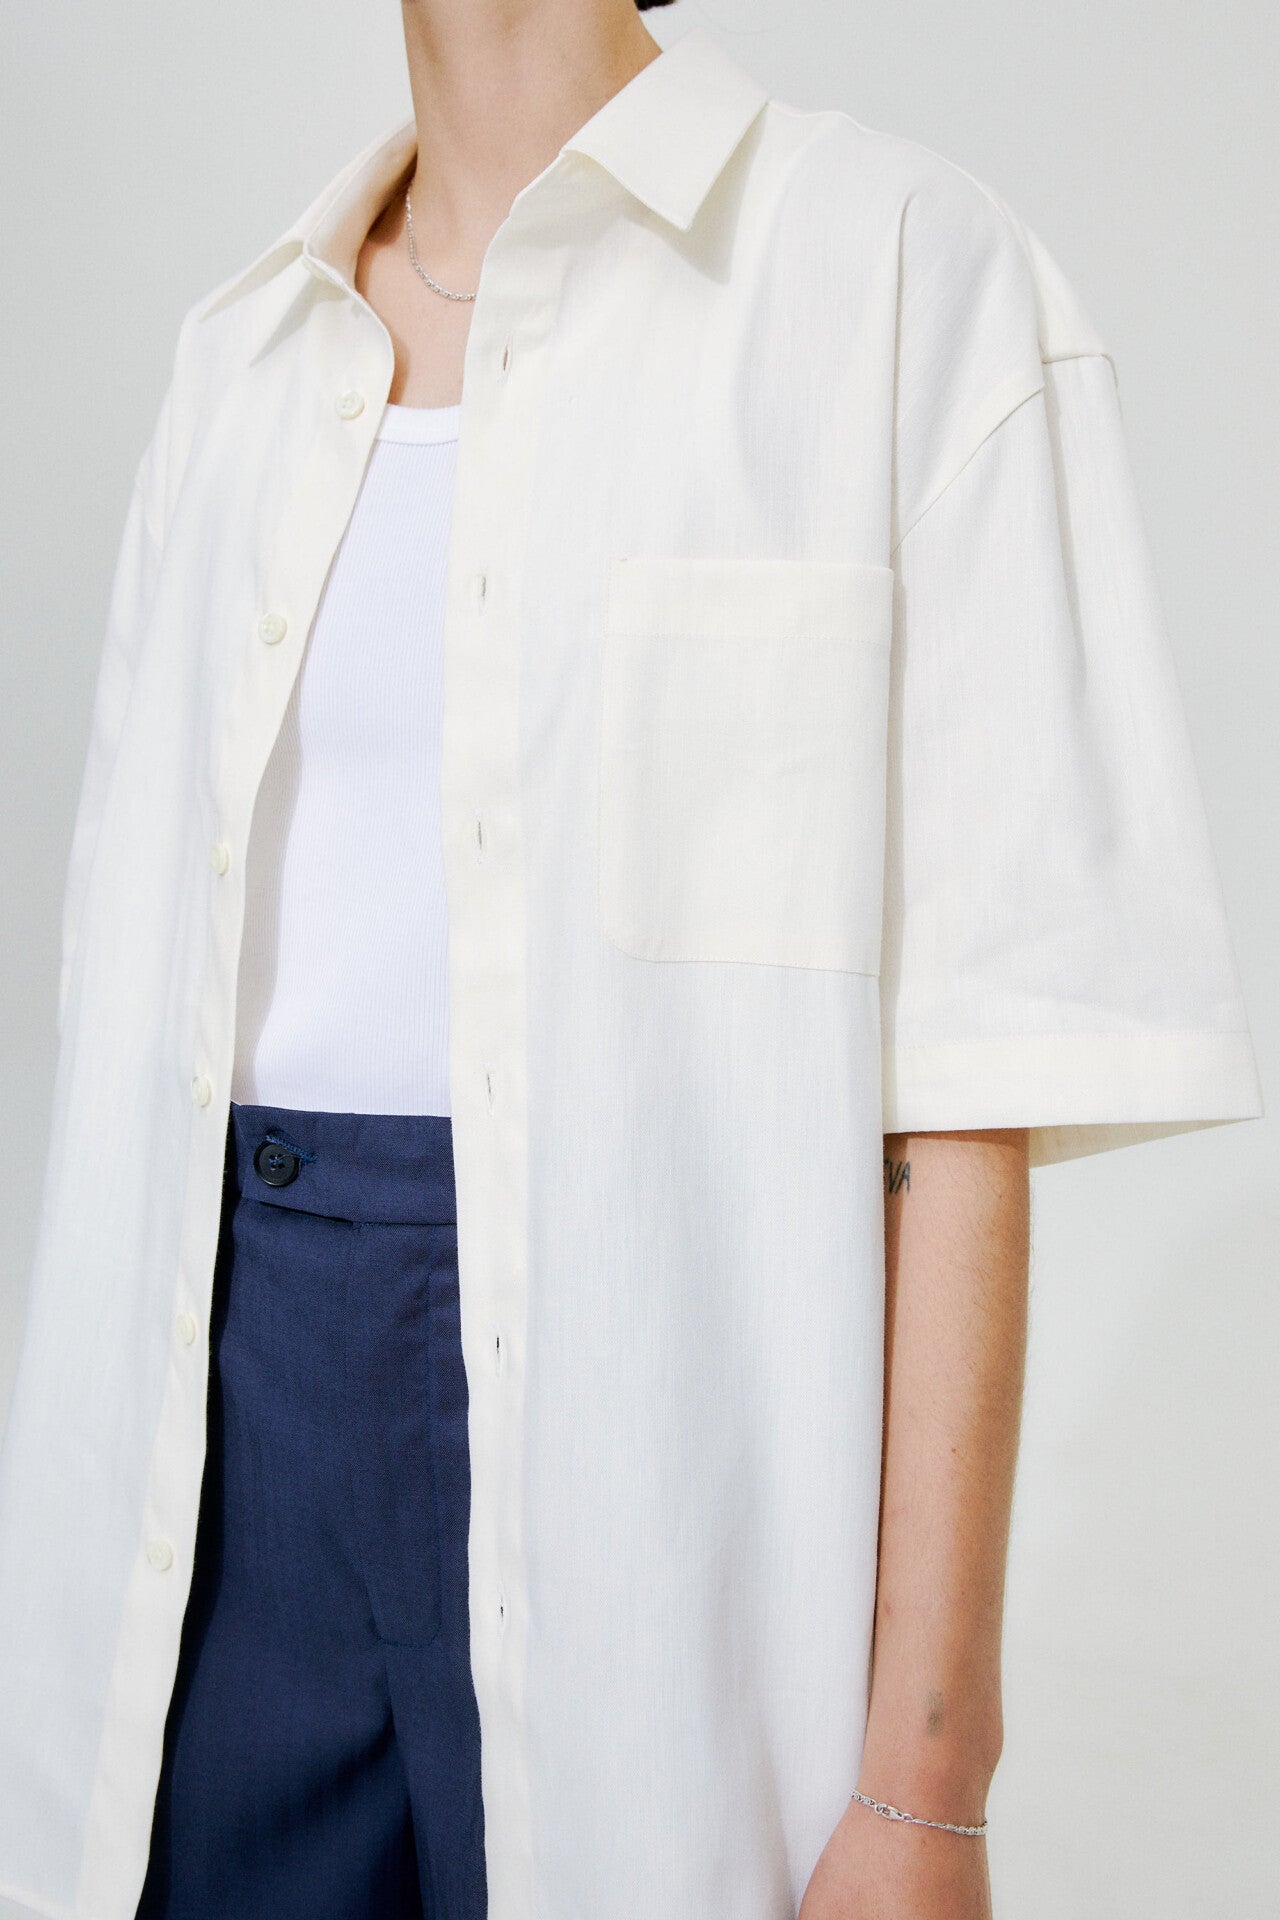 Ode shirt in ivory by goutez